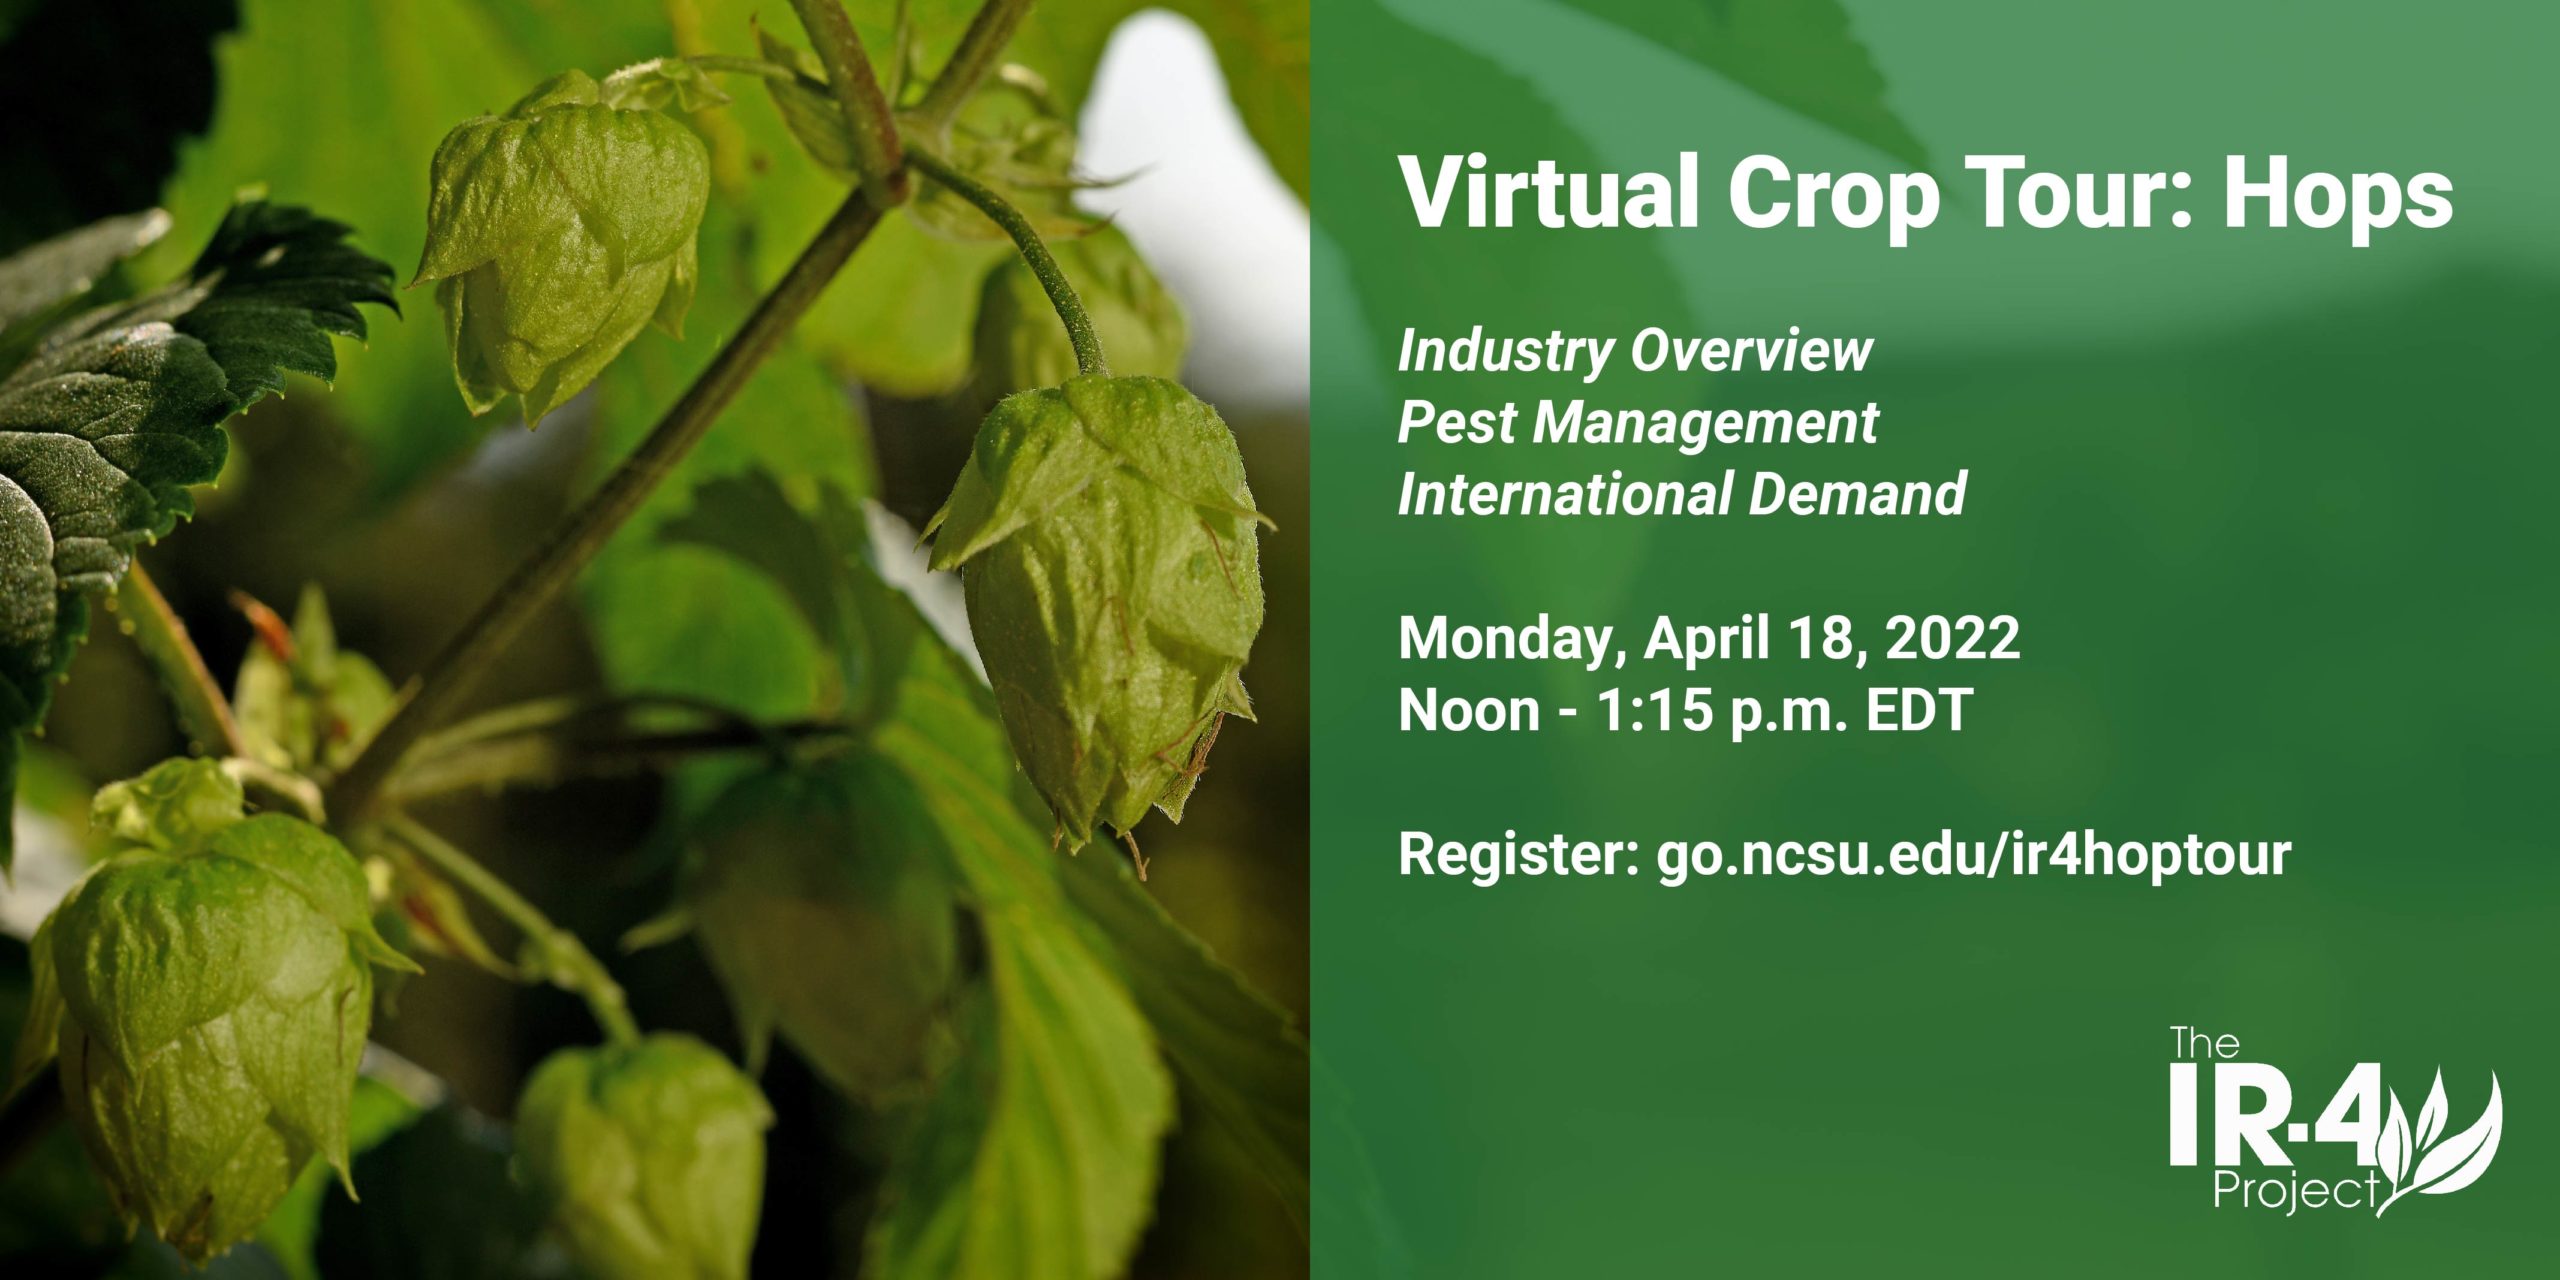 Image of hop plant with a green transparent box covering the right half of the image. Over the box is text in white that says "Virtual Crop Tour: Hops. Industry Overview, Pest Management, International Demand. Monday, April 18, 2022 Noon - 1:15 p.m. EDT. Register: go.ncsu.edu/ir4hoptour"